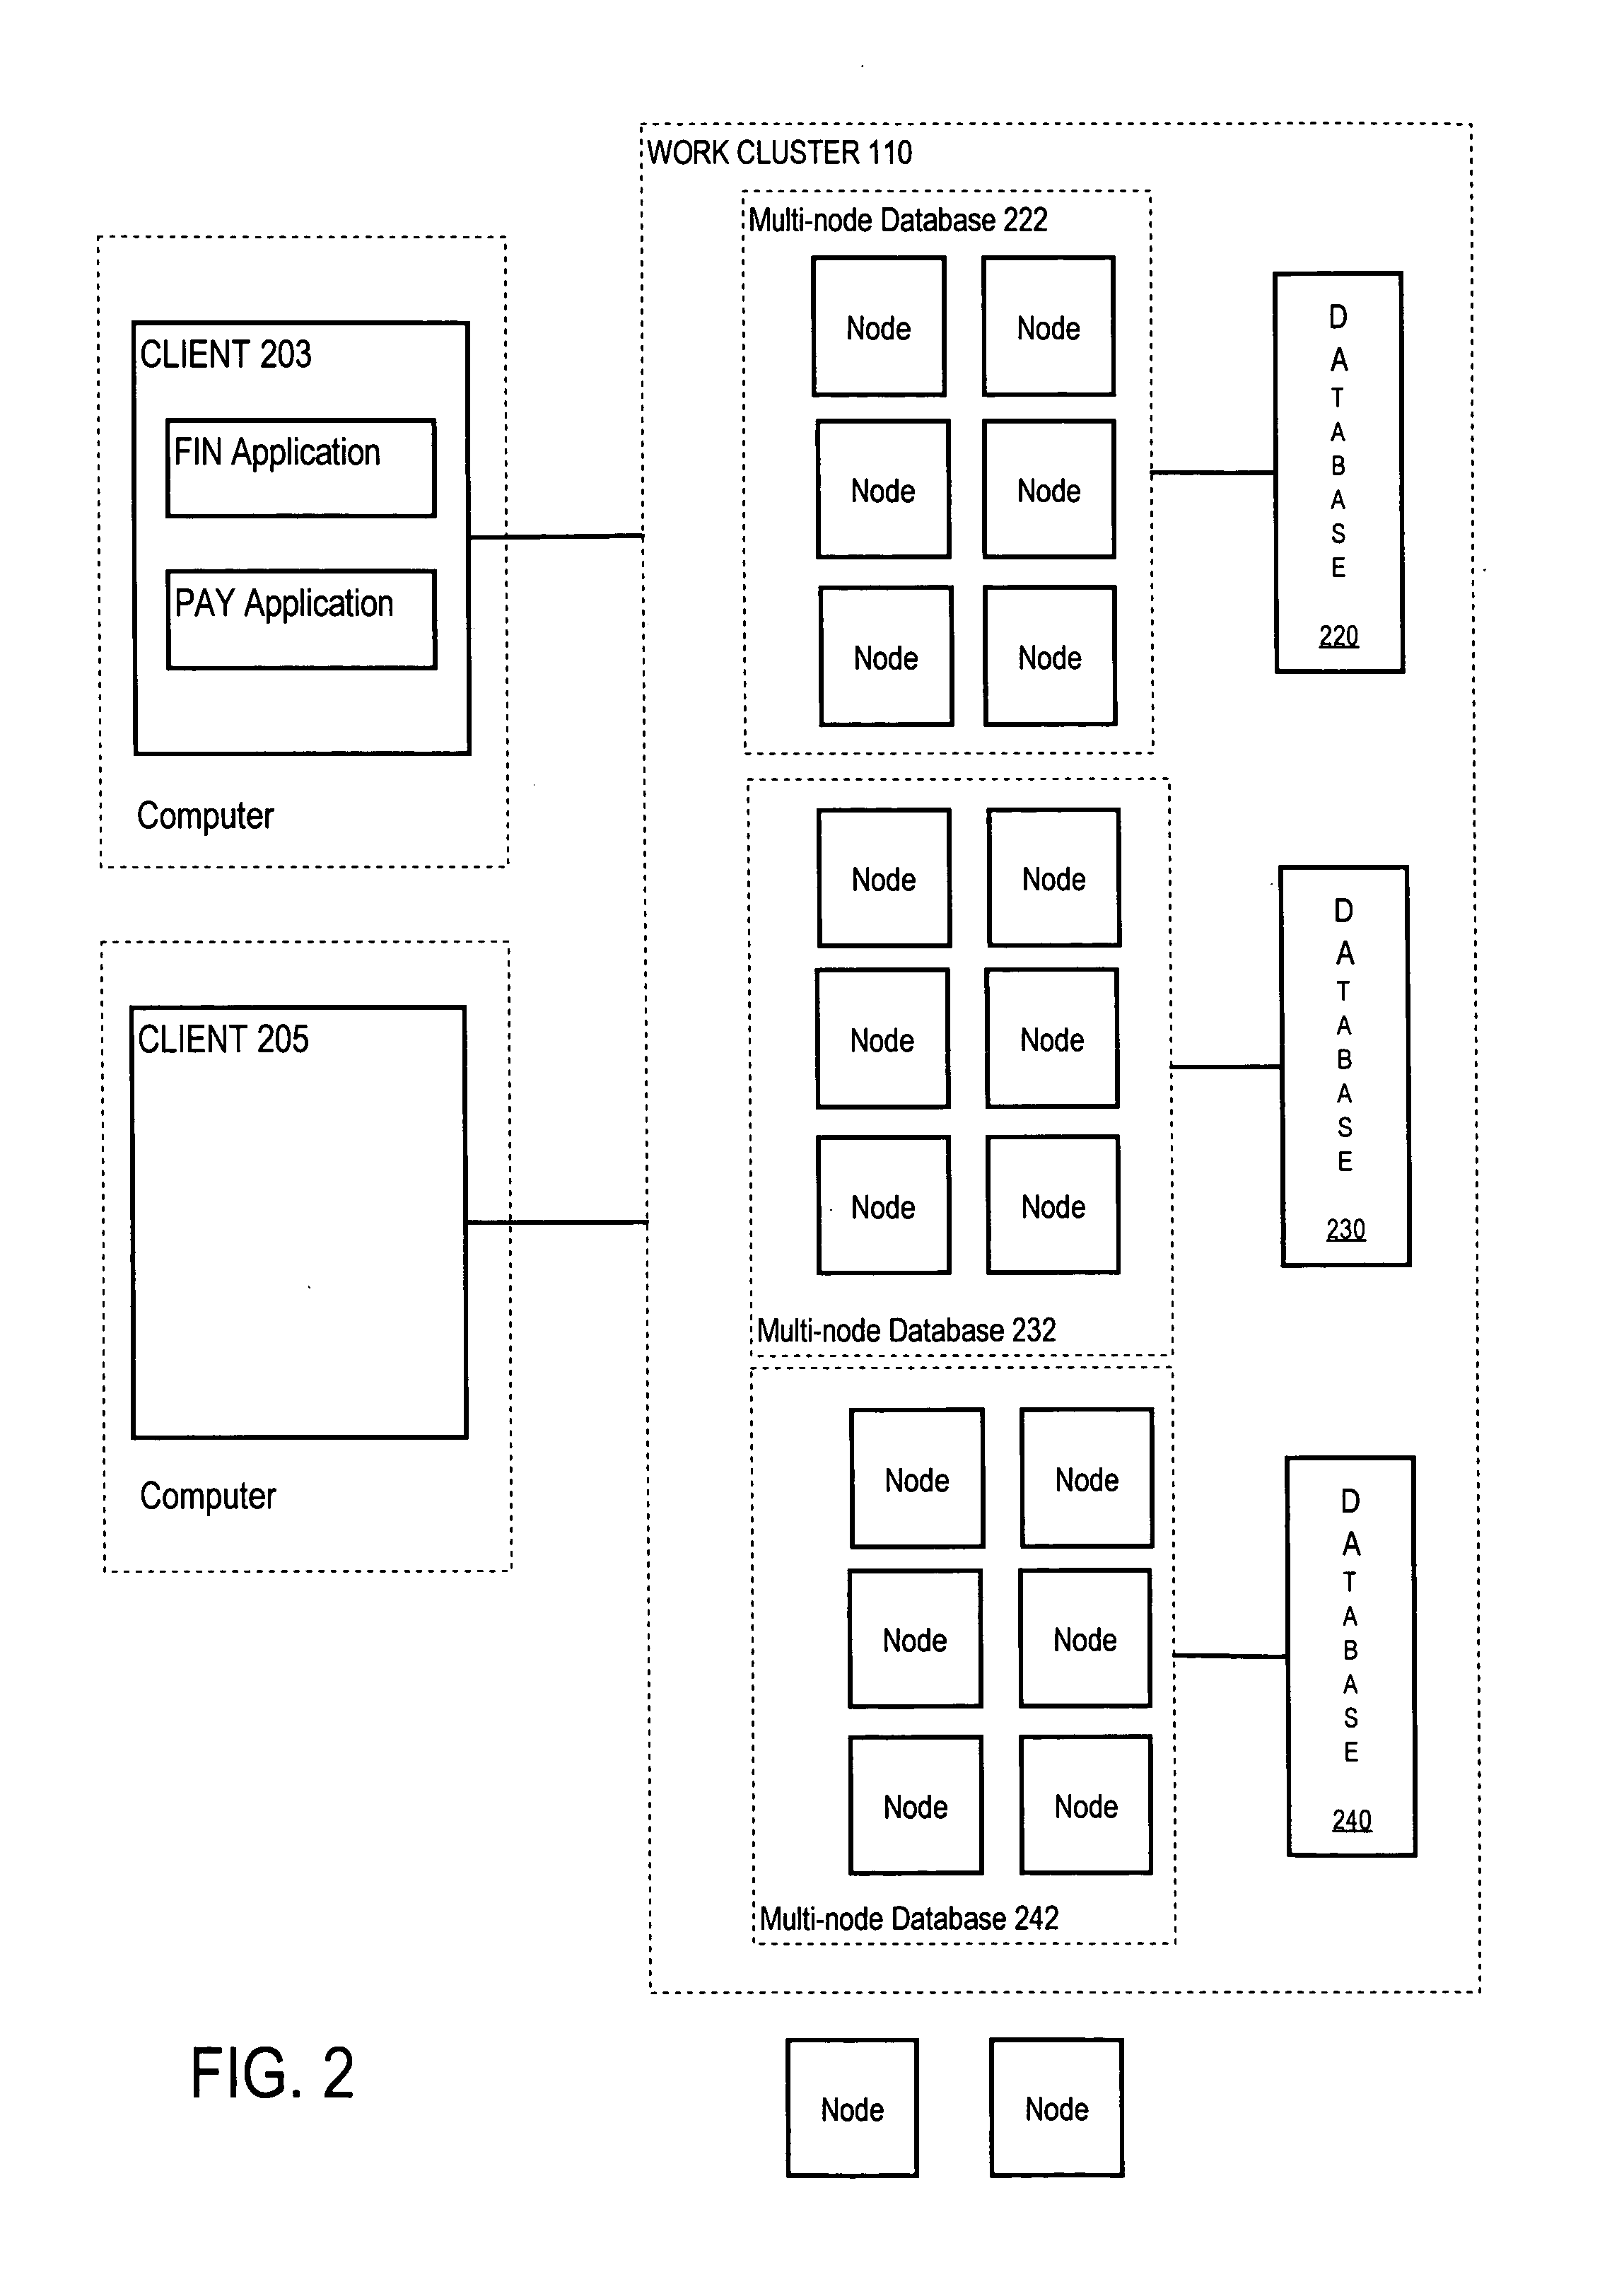 Hierarchical management of the dynamic allocation of resources in a multi-node system